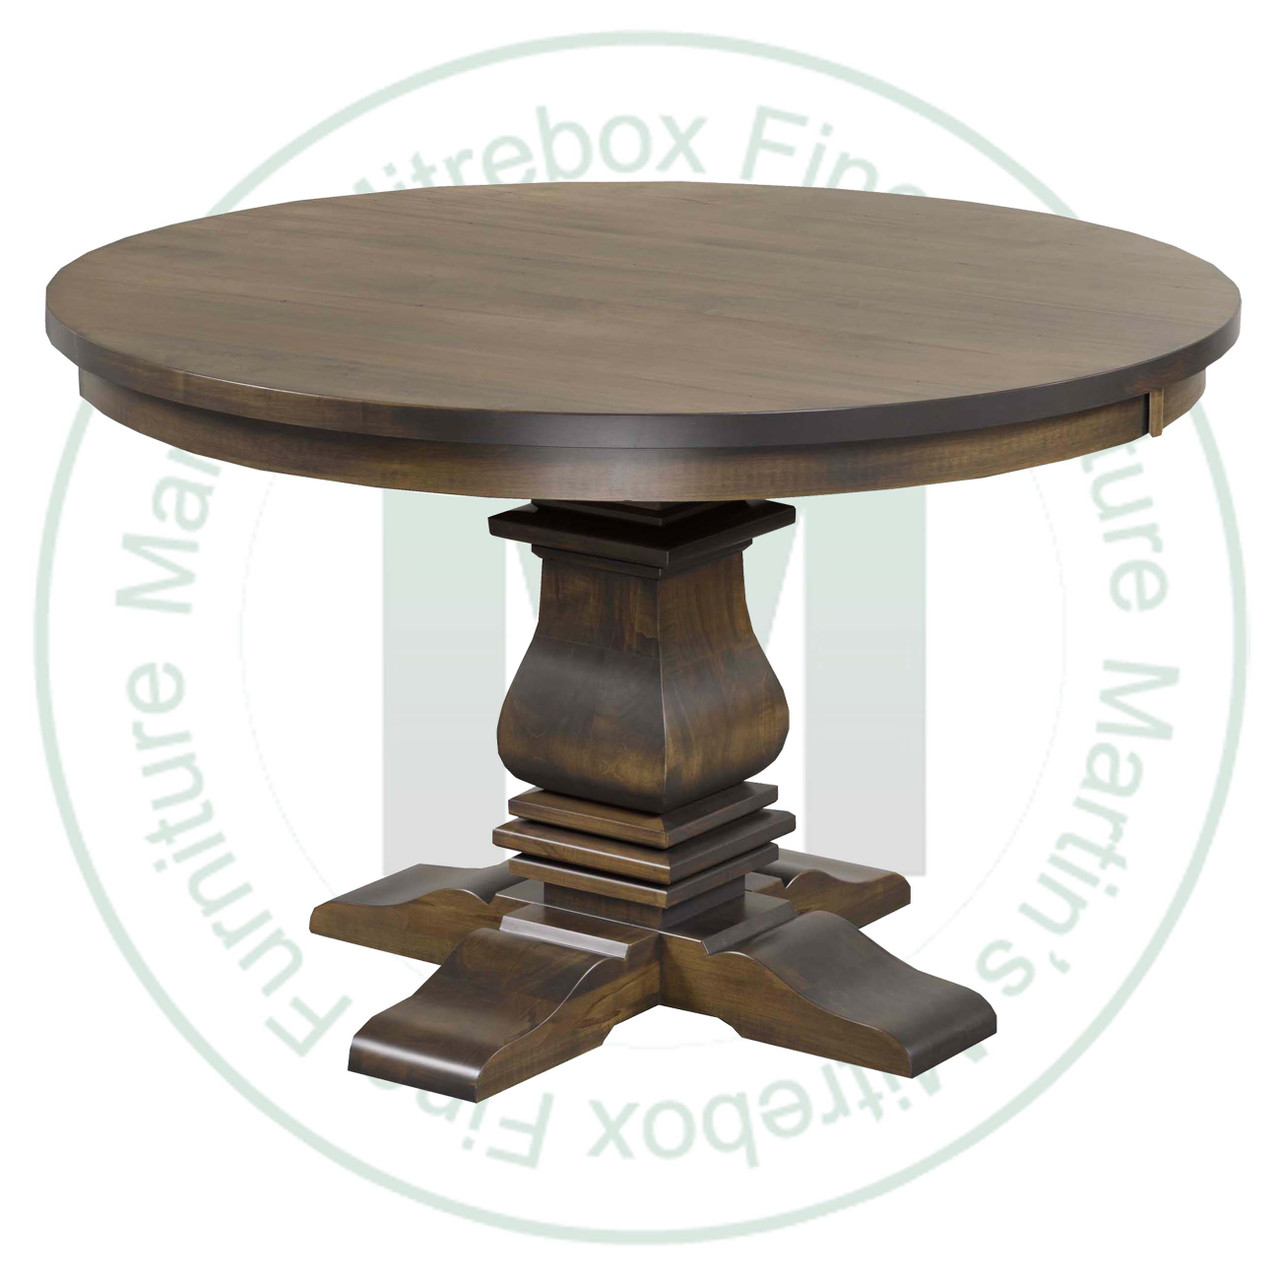 Maple Spartan Collection Single Pedestal Table 60''D x 60''W x 30''H With 1 - 12'' Leaf. Table Has 1'' Thick Top